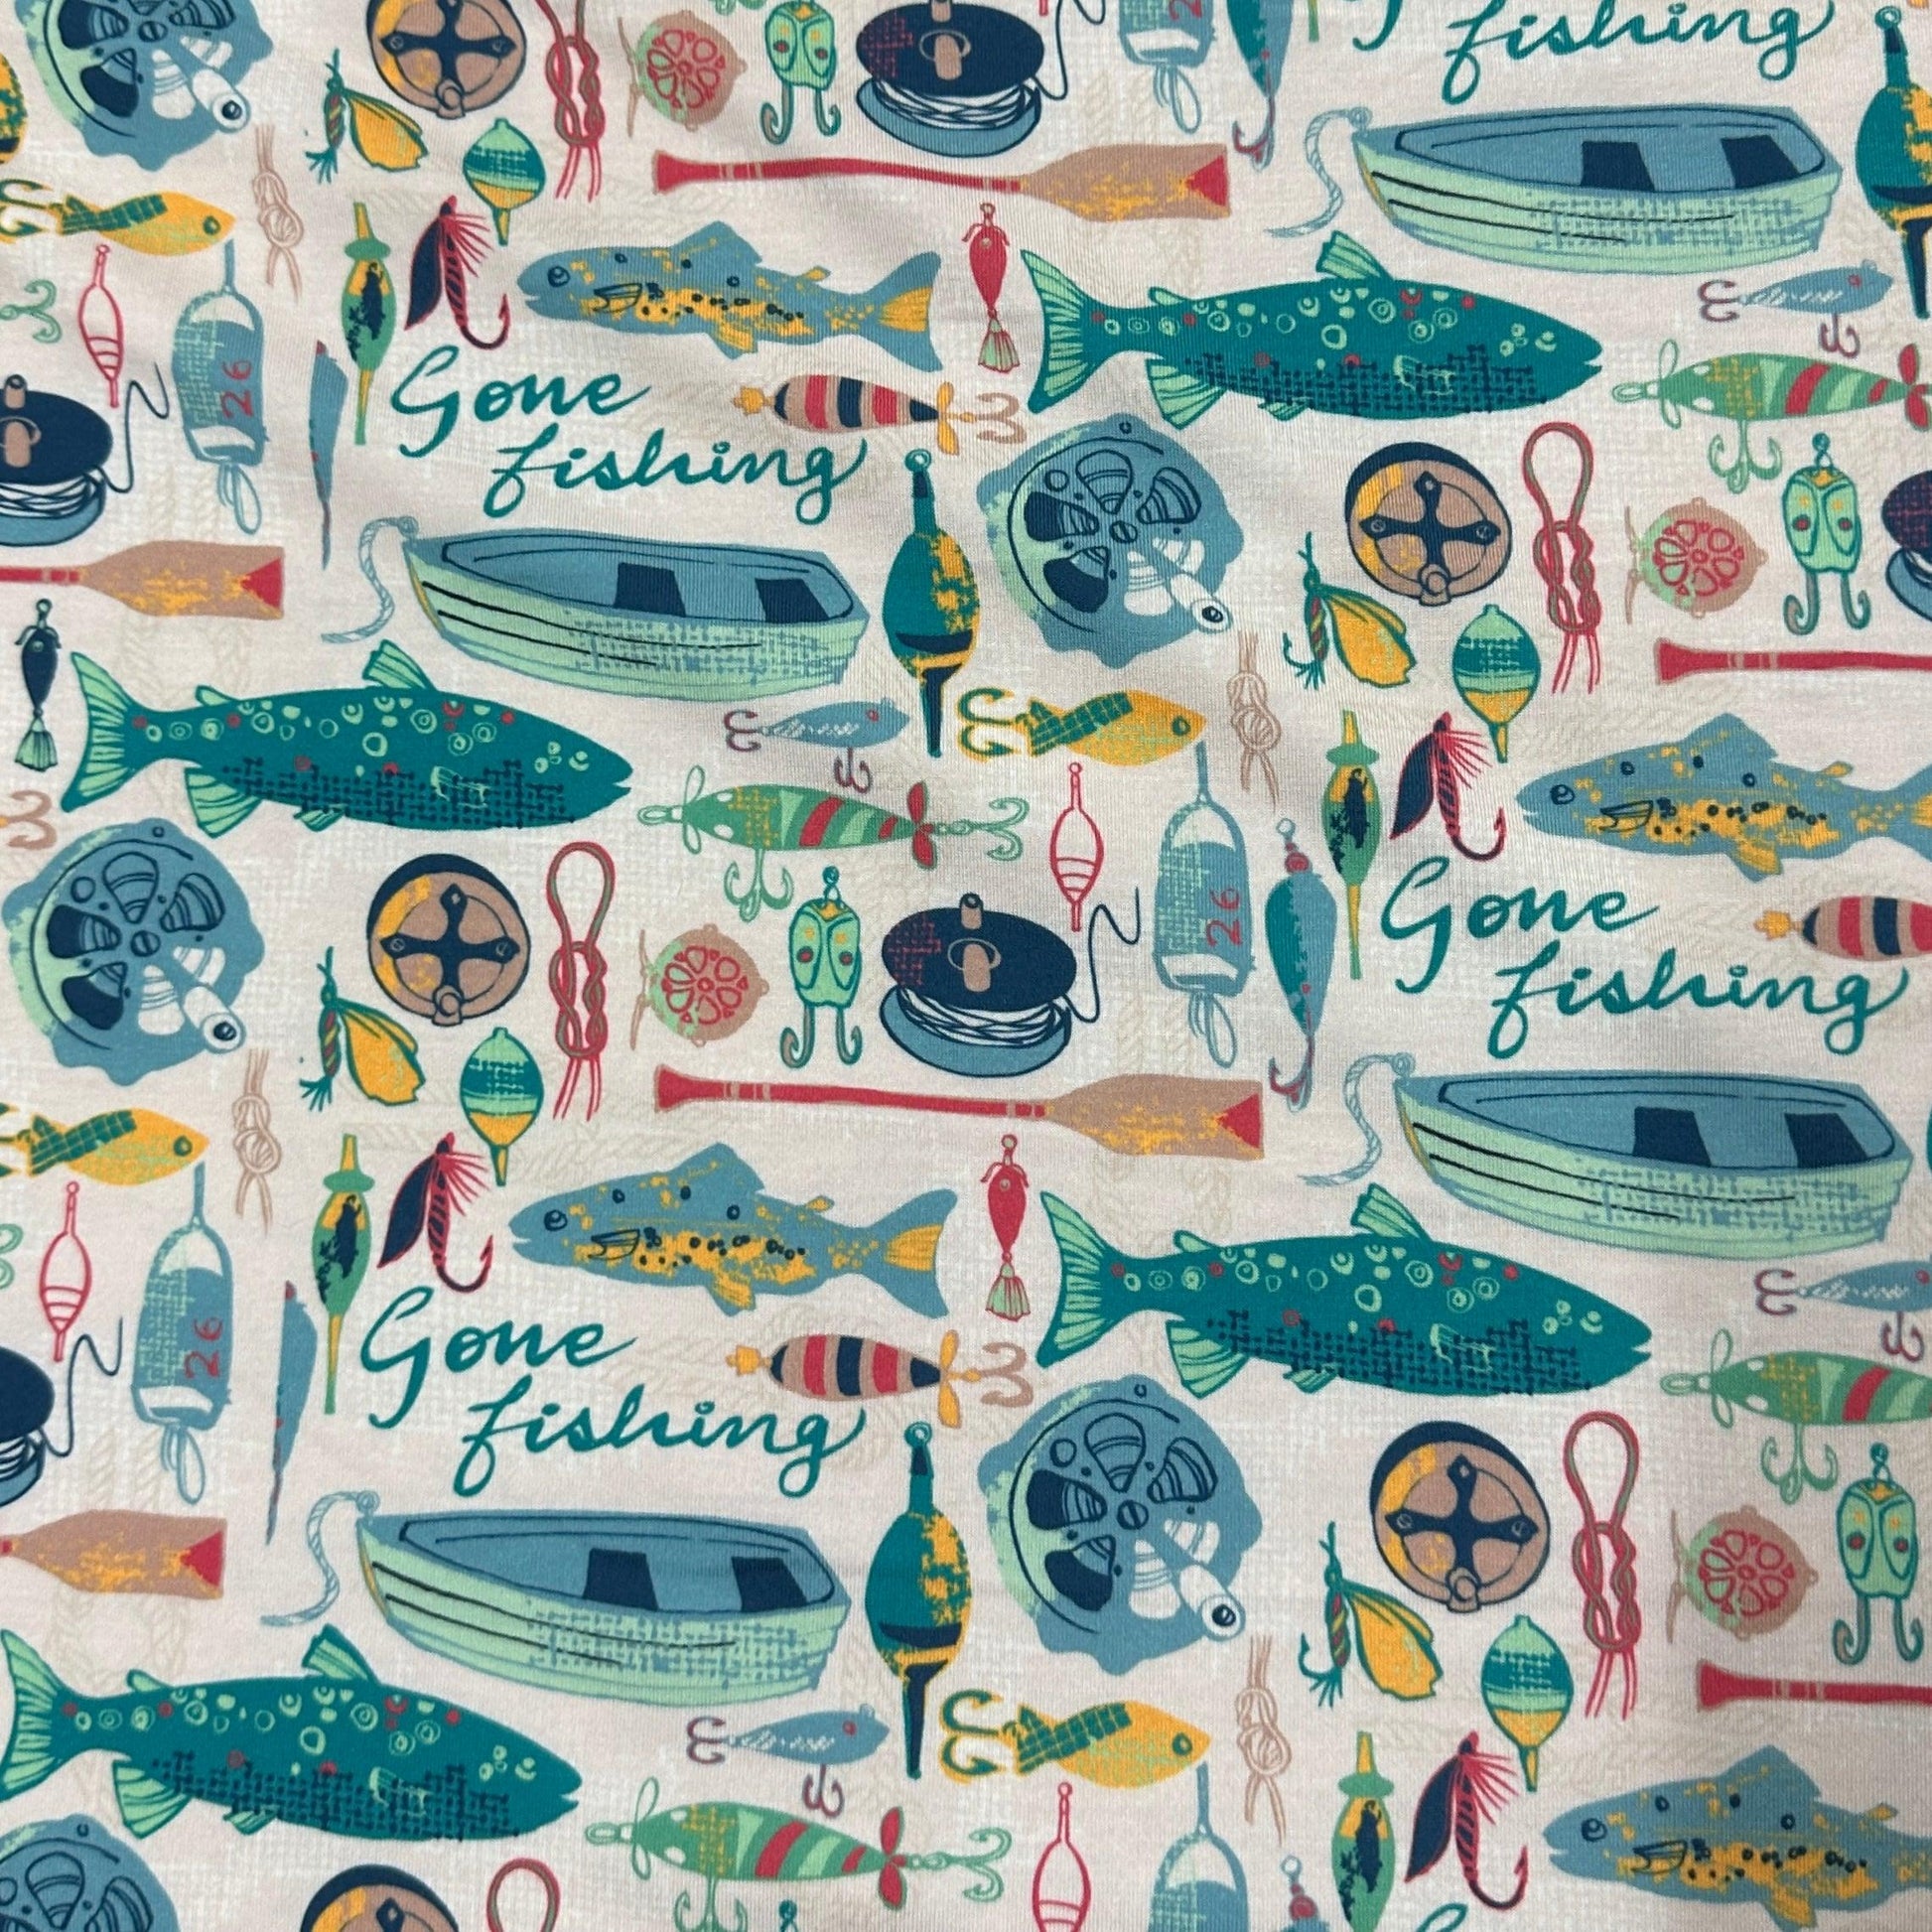 Gone Fishing on Polyester/Spandex Jersey Fabric - Nature's Fabrics